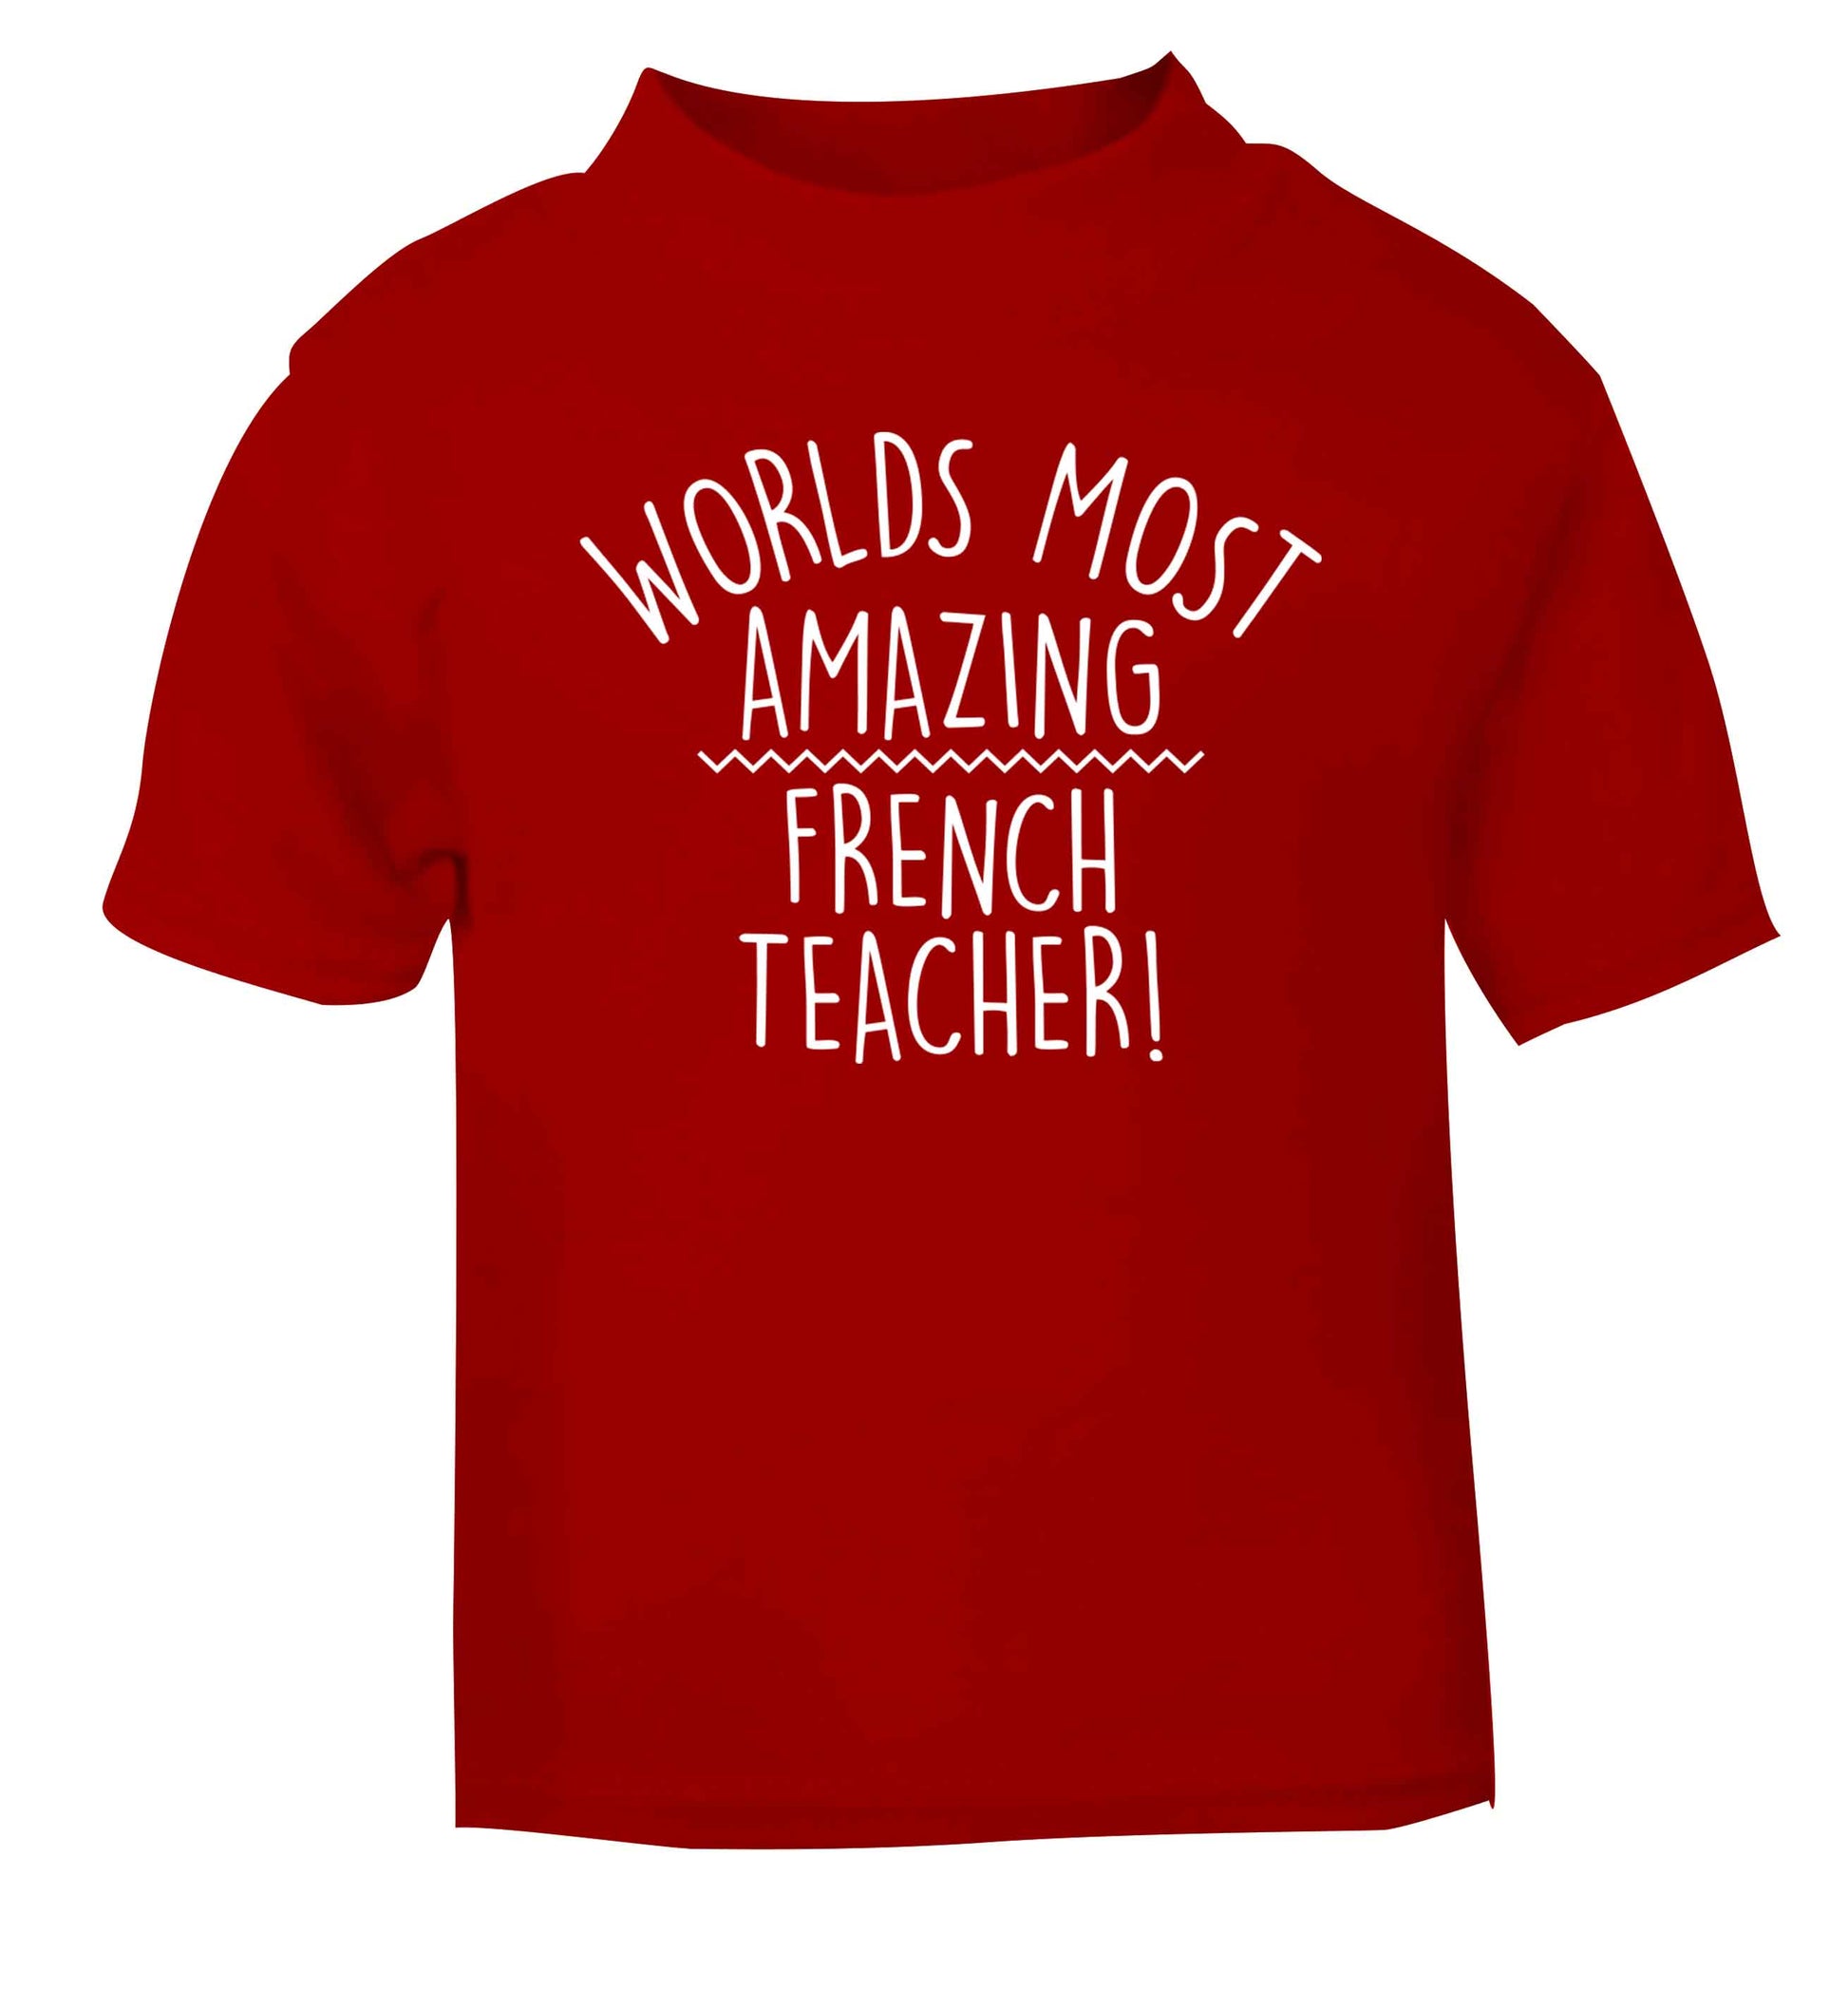 Worlds most amazing French teacher red baby toddler Tshirt 2 Years